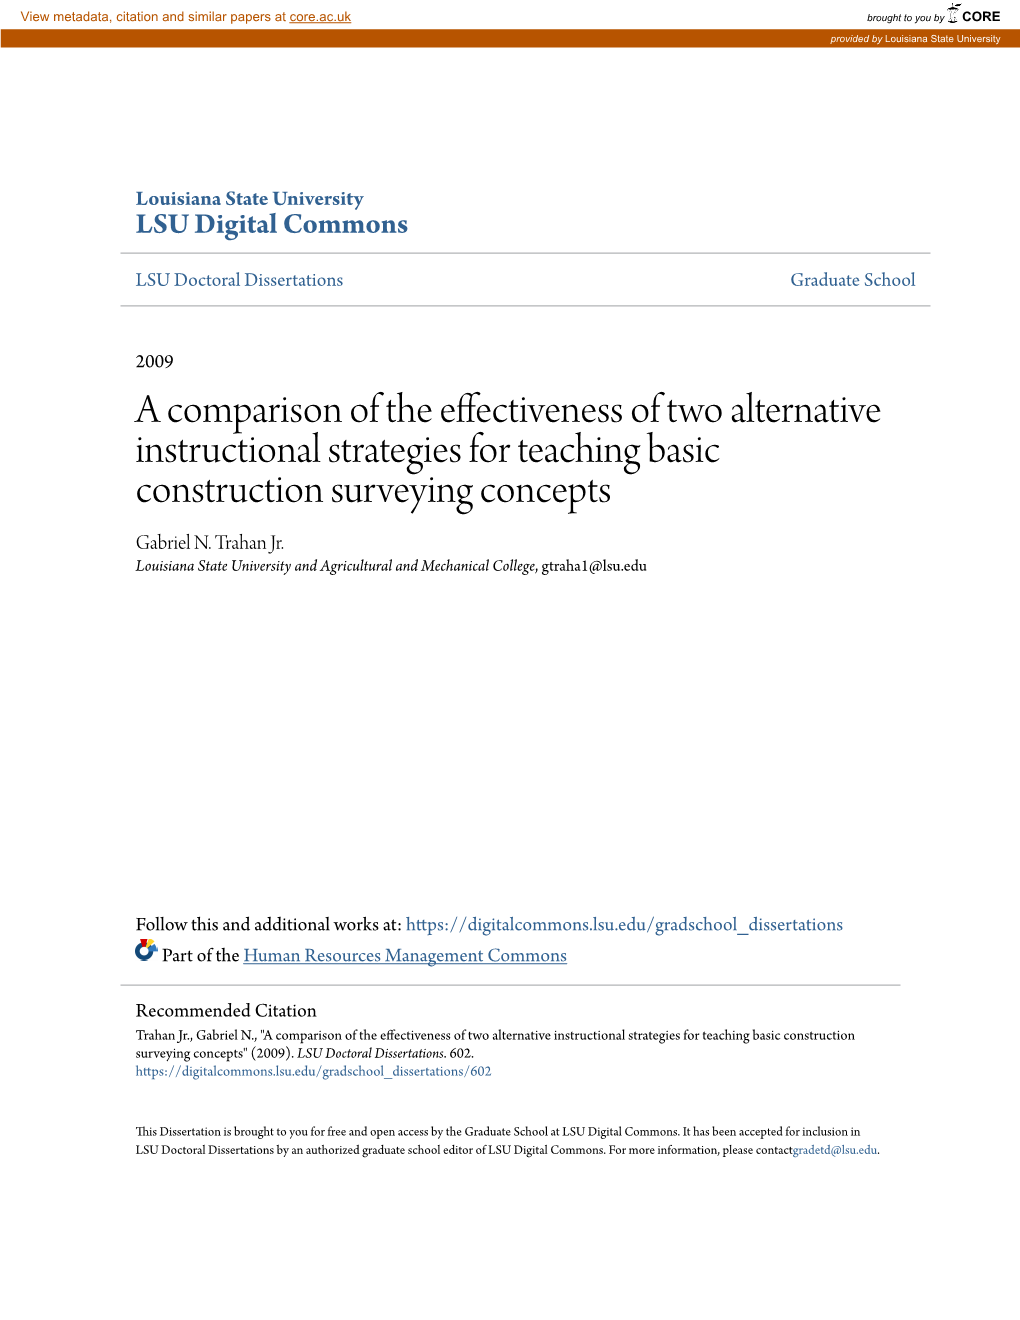 A Comparison of the Effectiveness of Two Alternative Instructional Strategies for Teaching Basic Construction Surveying Concepts Gabriel N